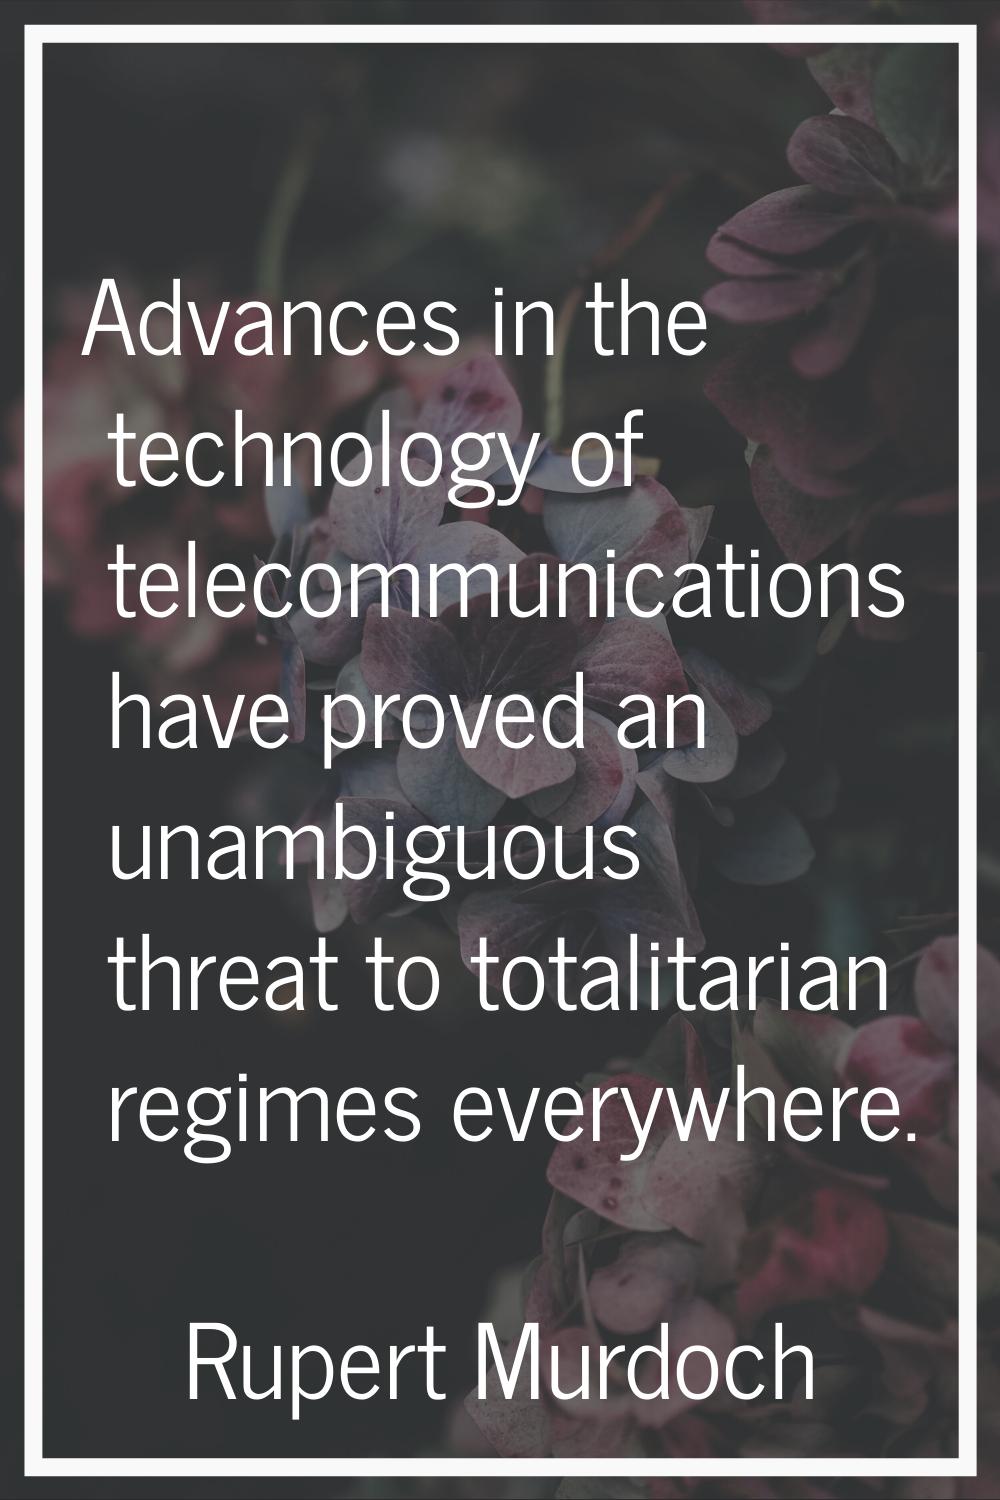 Advances in the technology of telecommunications have proved an unambiguous threat to totalitarian 